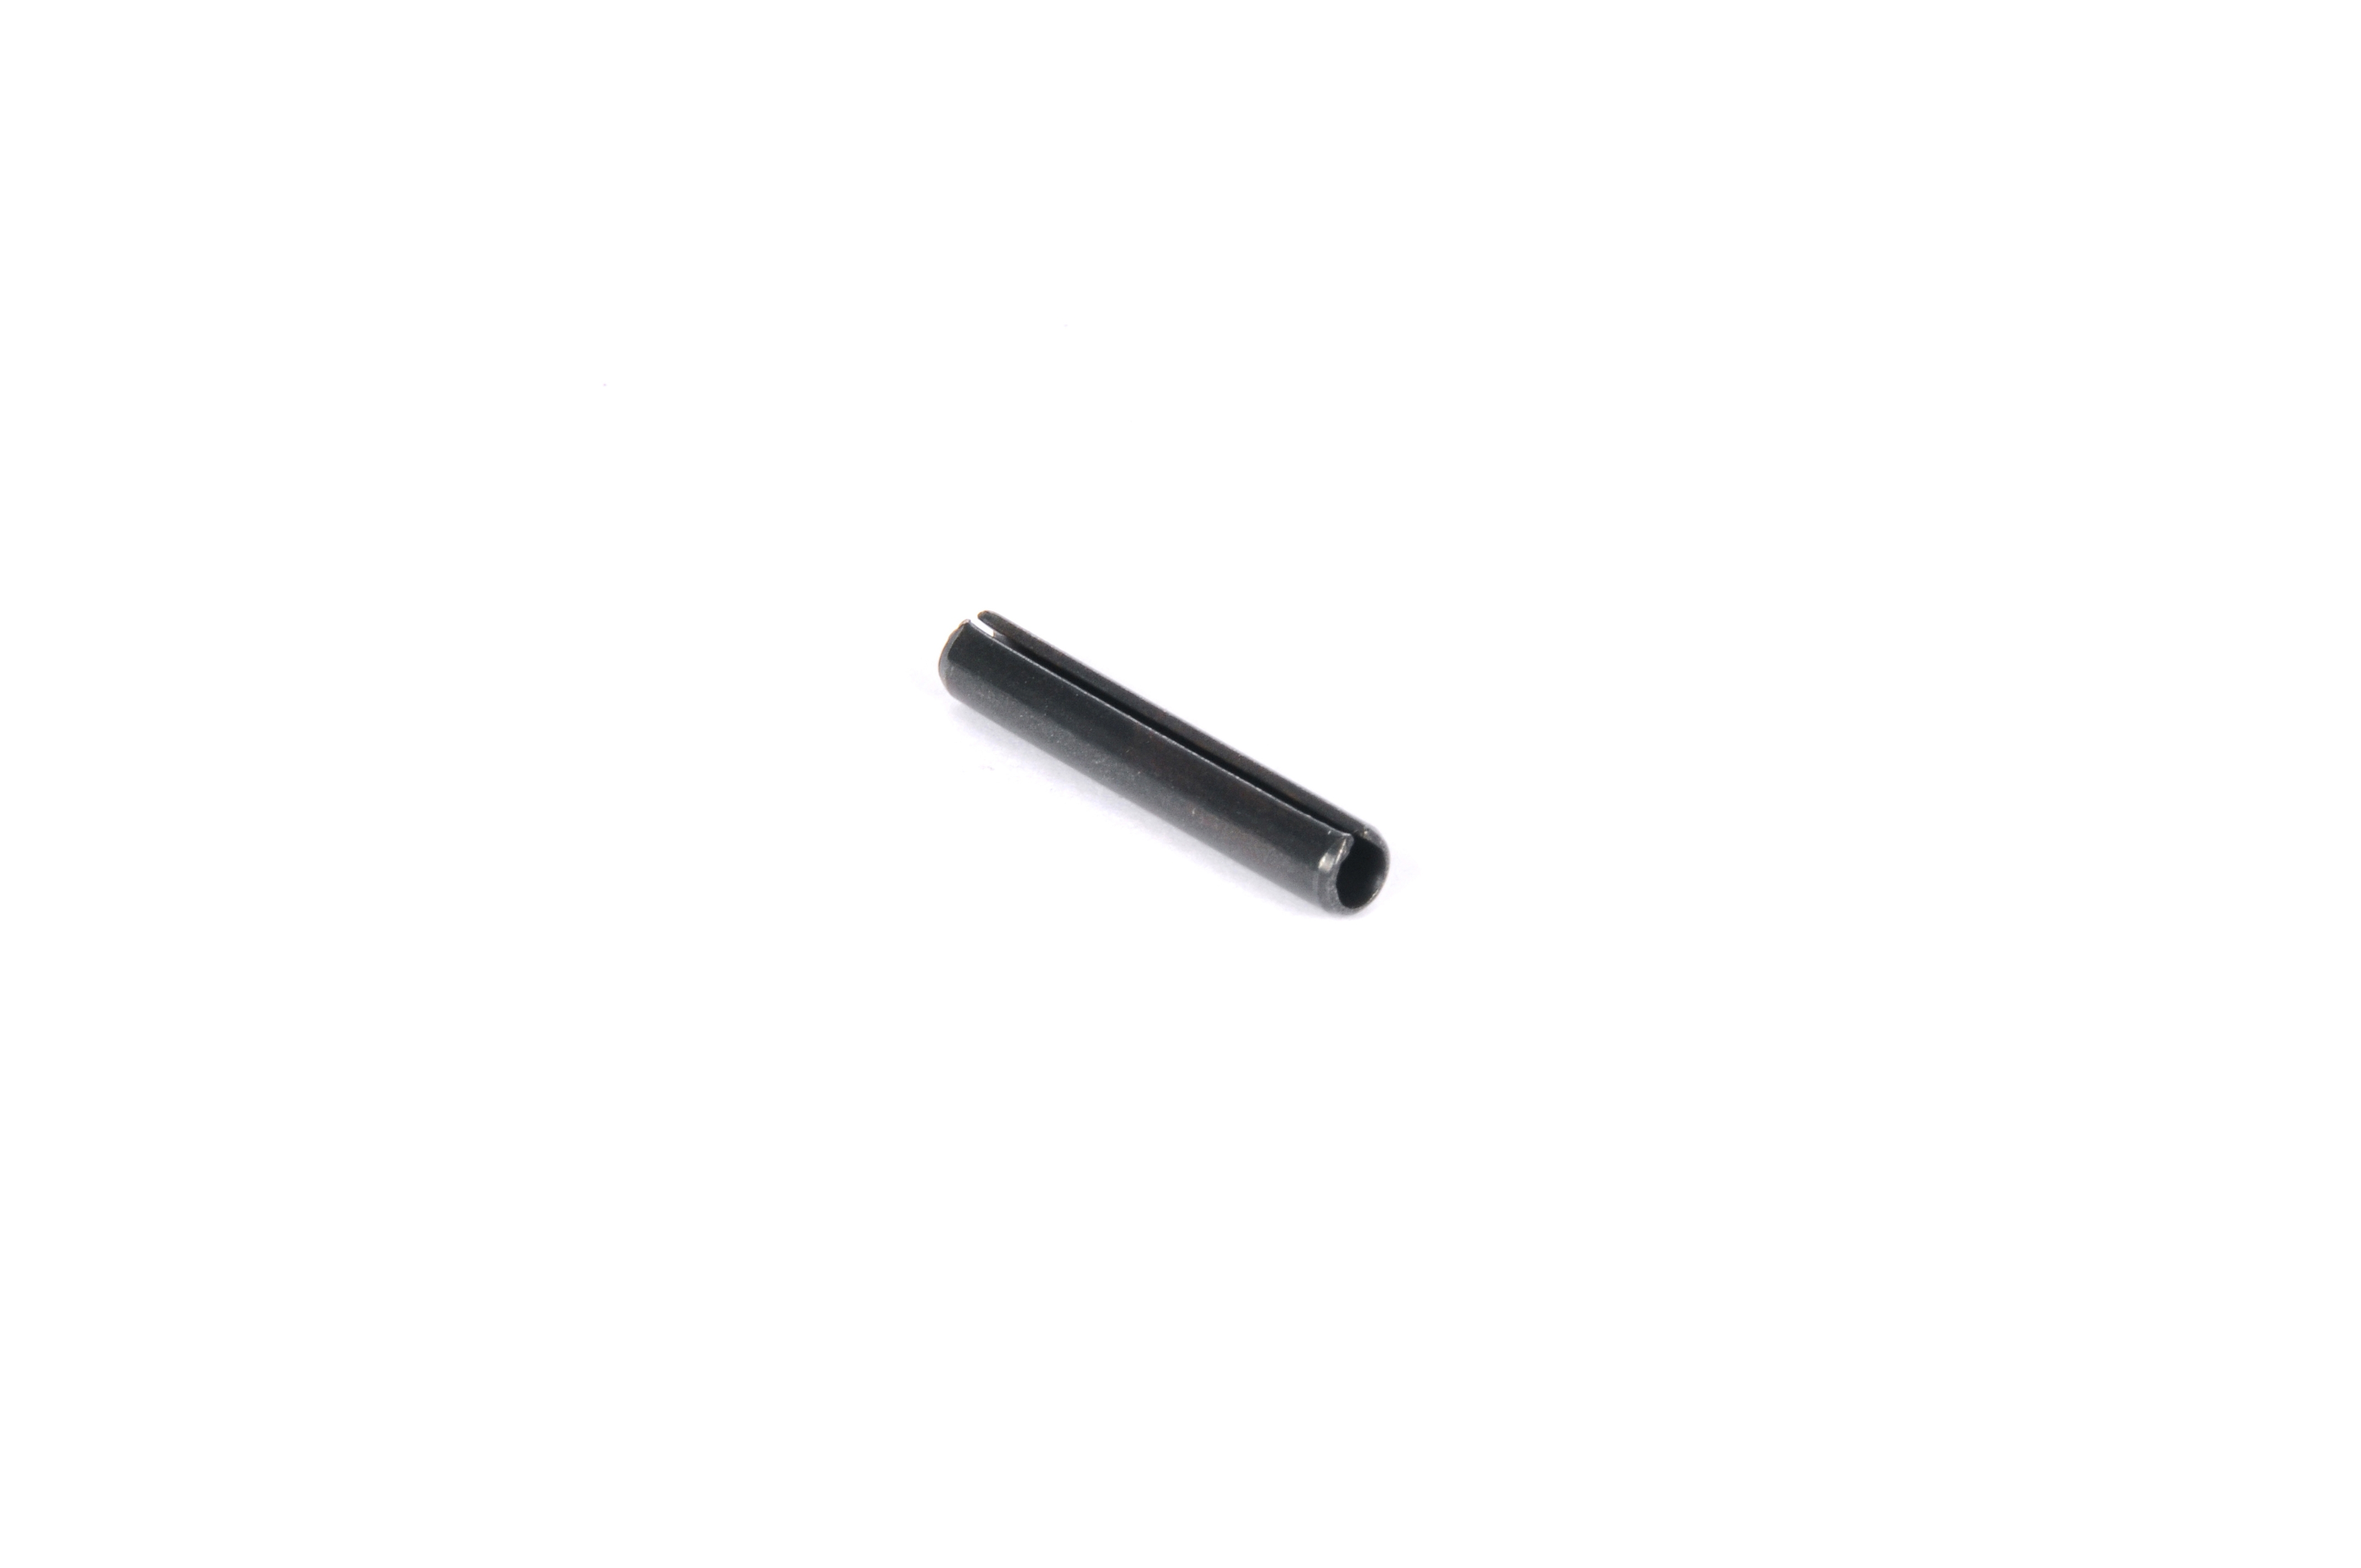 GM GENUINE PARTS - Automatic Transmission Manual Shift Shaft Pin - GMP 24225792